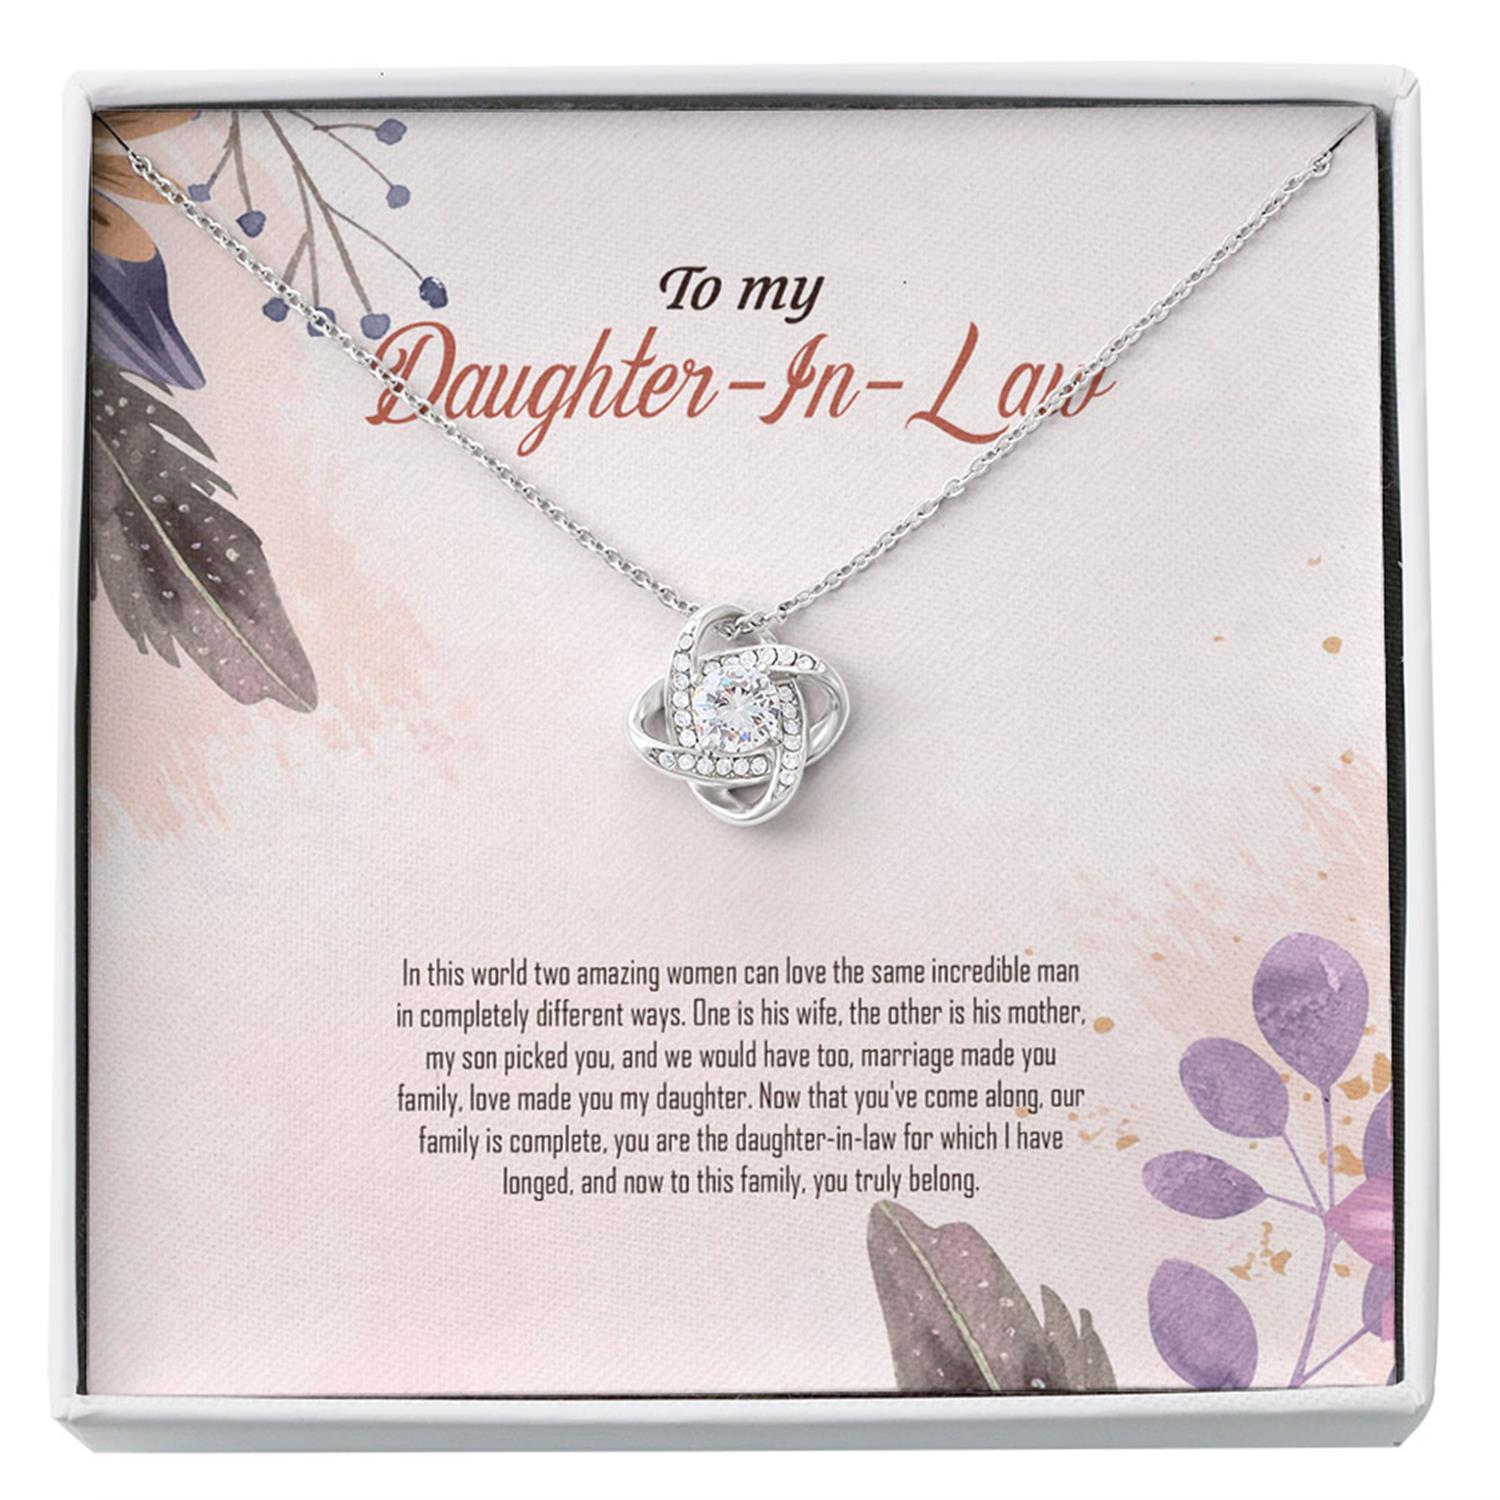 Daughter-in-law Necklace, Love Knots Necklace To My Daughter-in-Law Necklace Gifts Custom Necklace